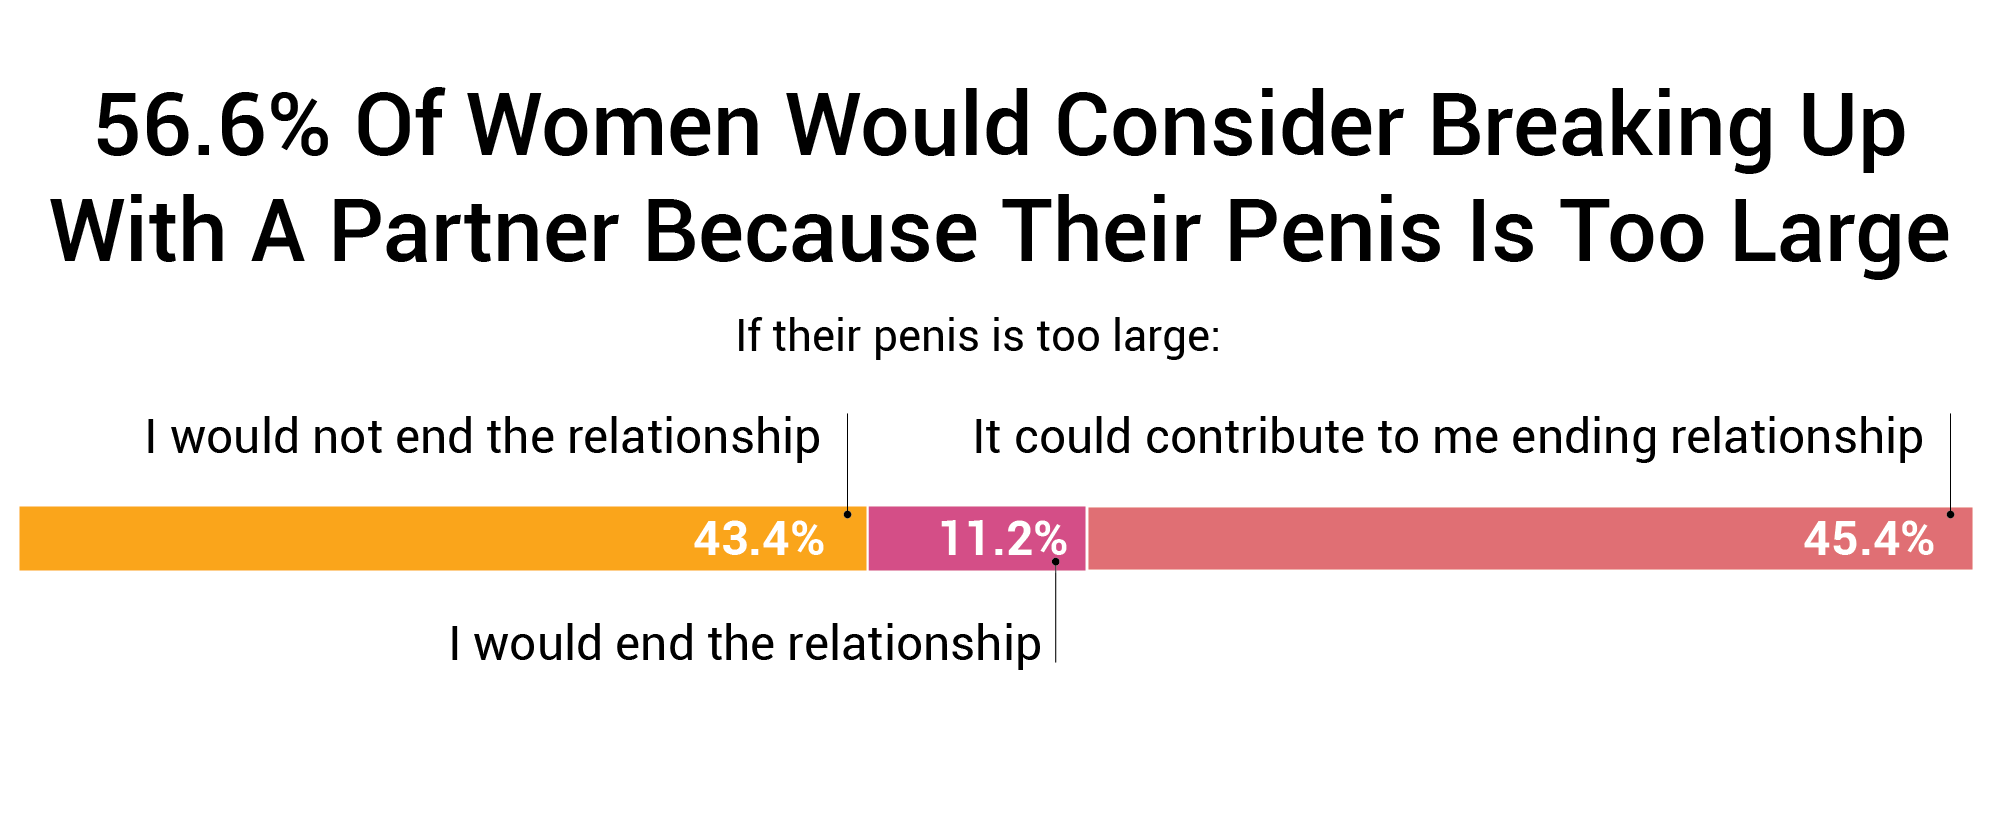 Does Size Matter? 91.7% Of Women Say It